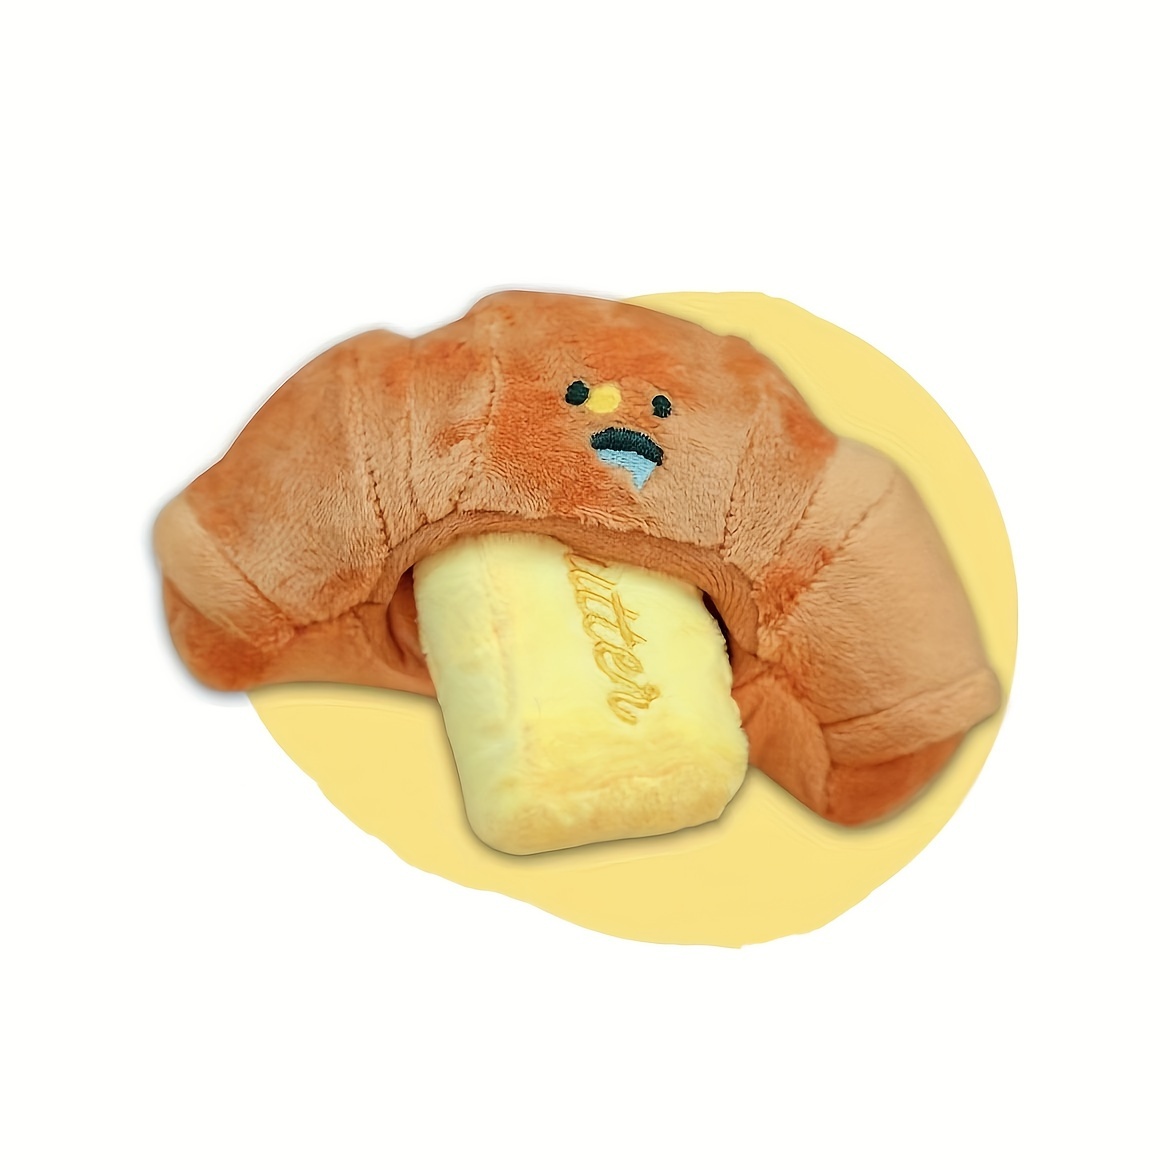 French Croissant Dog Toy